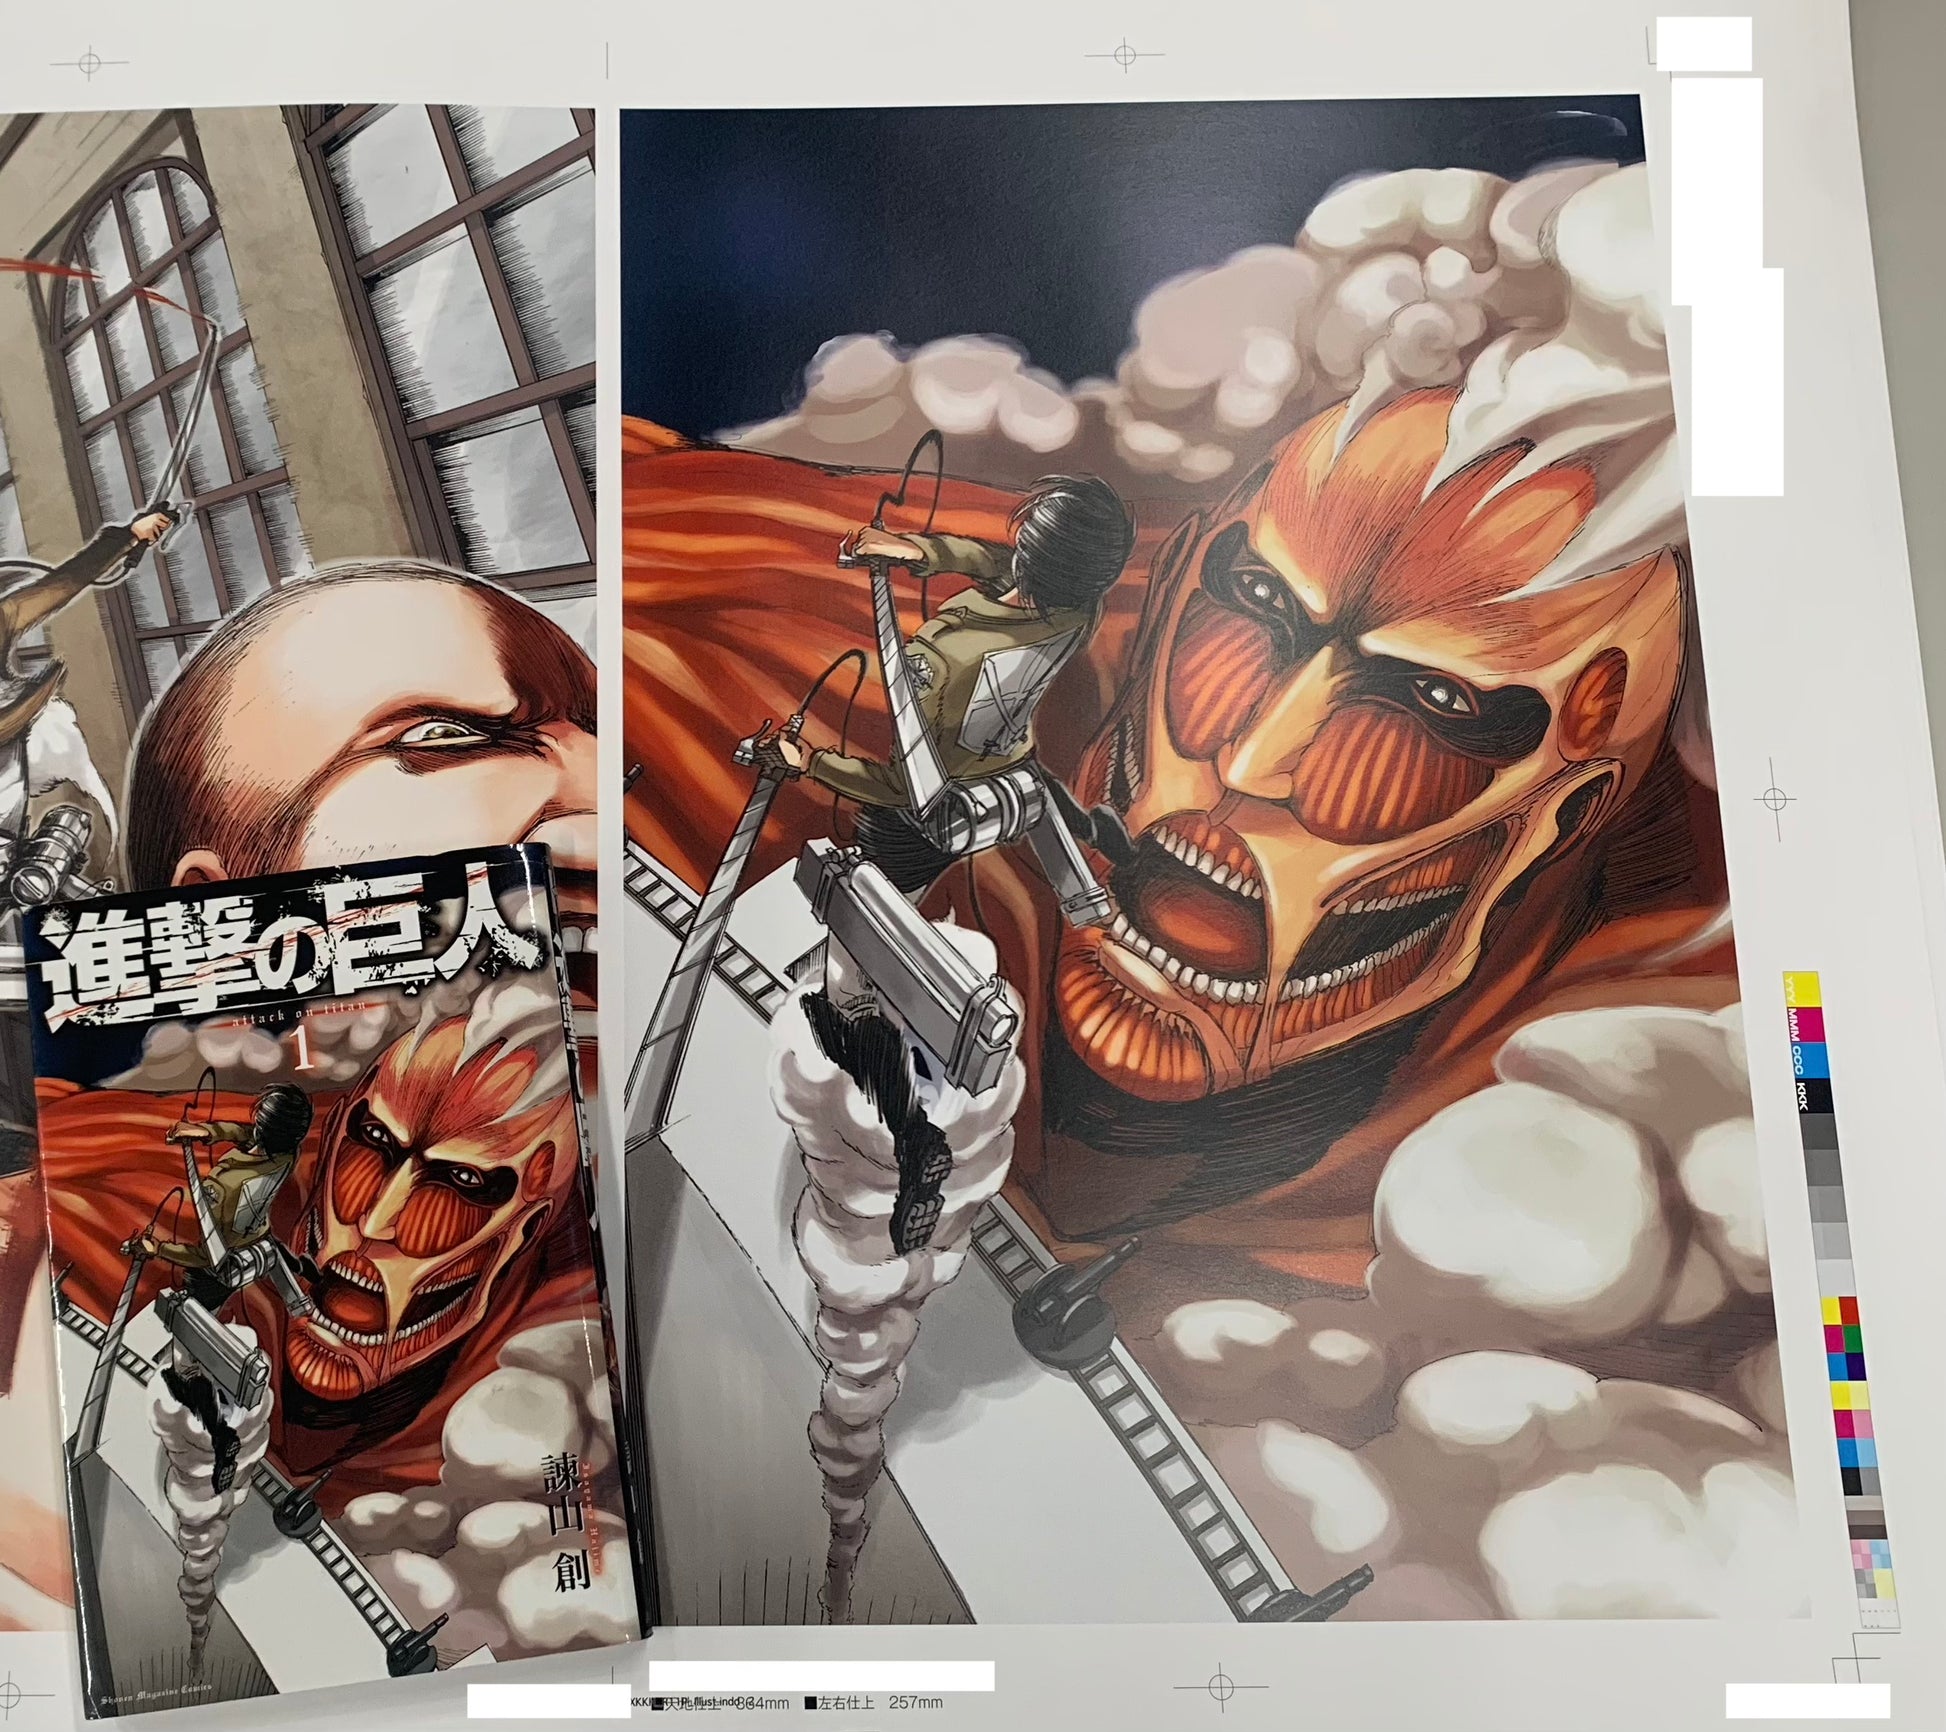 Attack on Titan Shares First Look at Its New Artbook, Fly